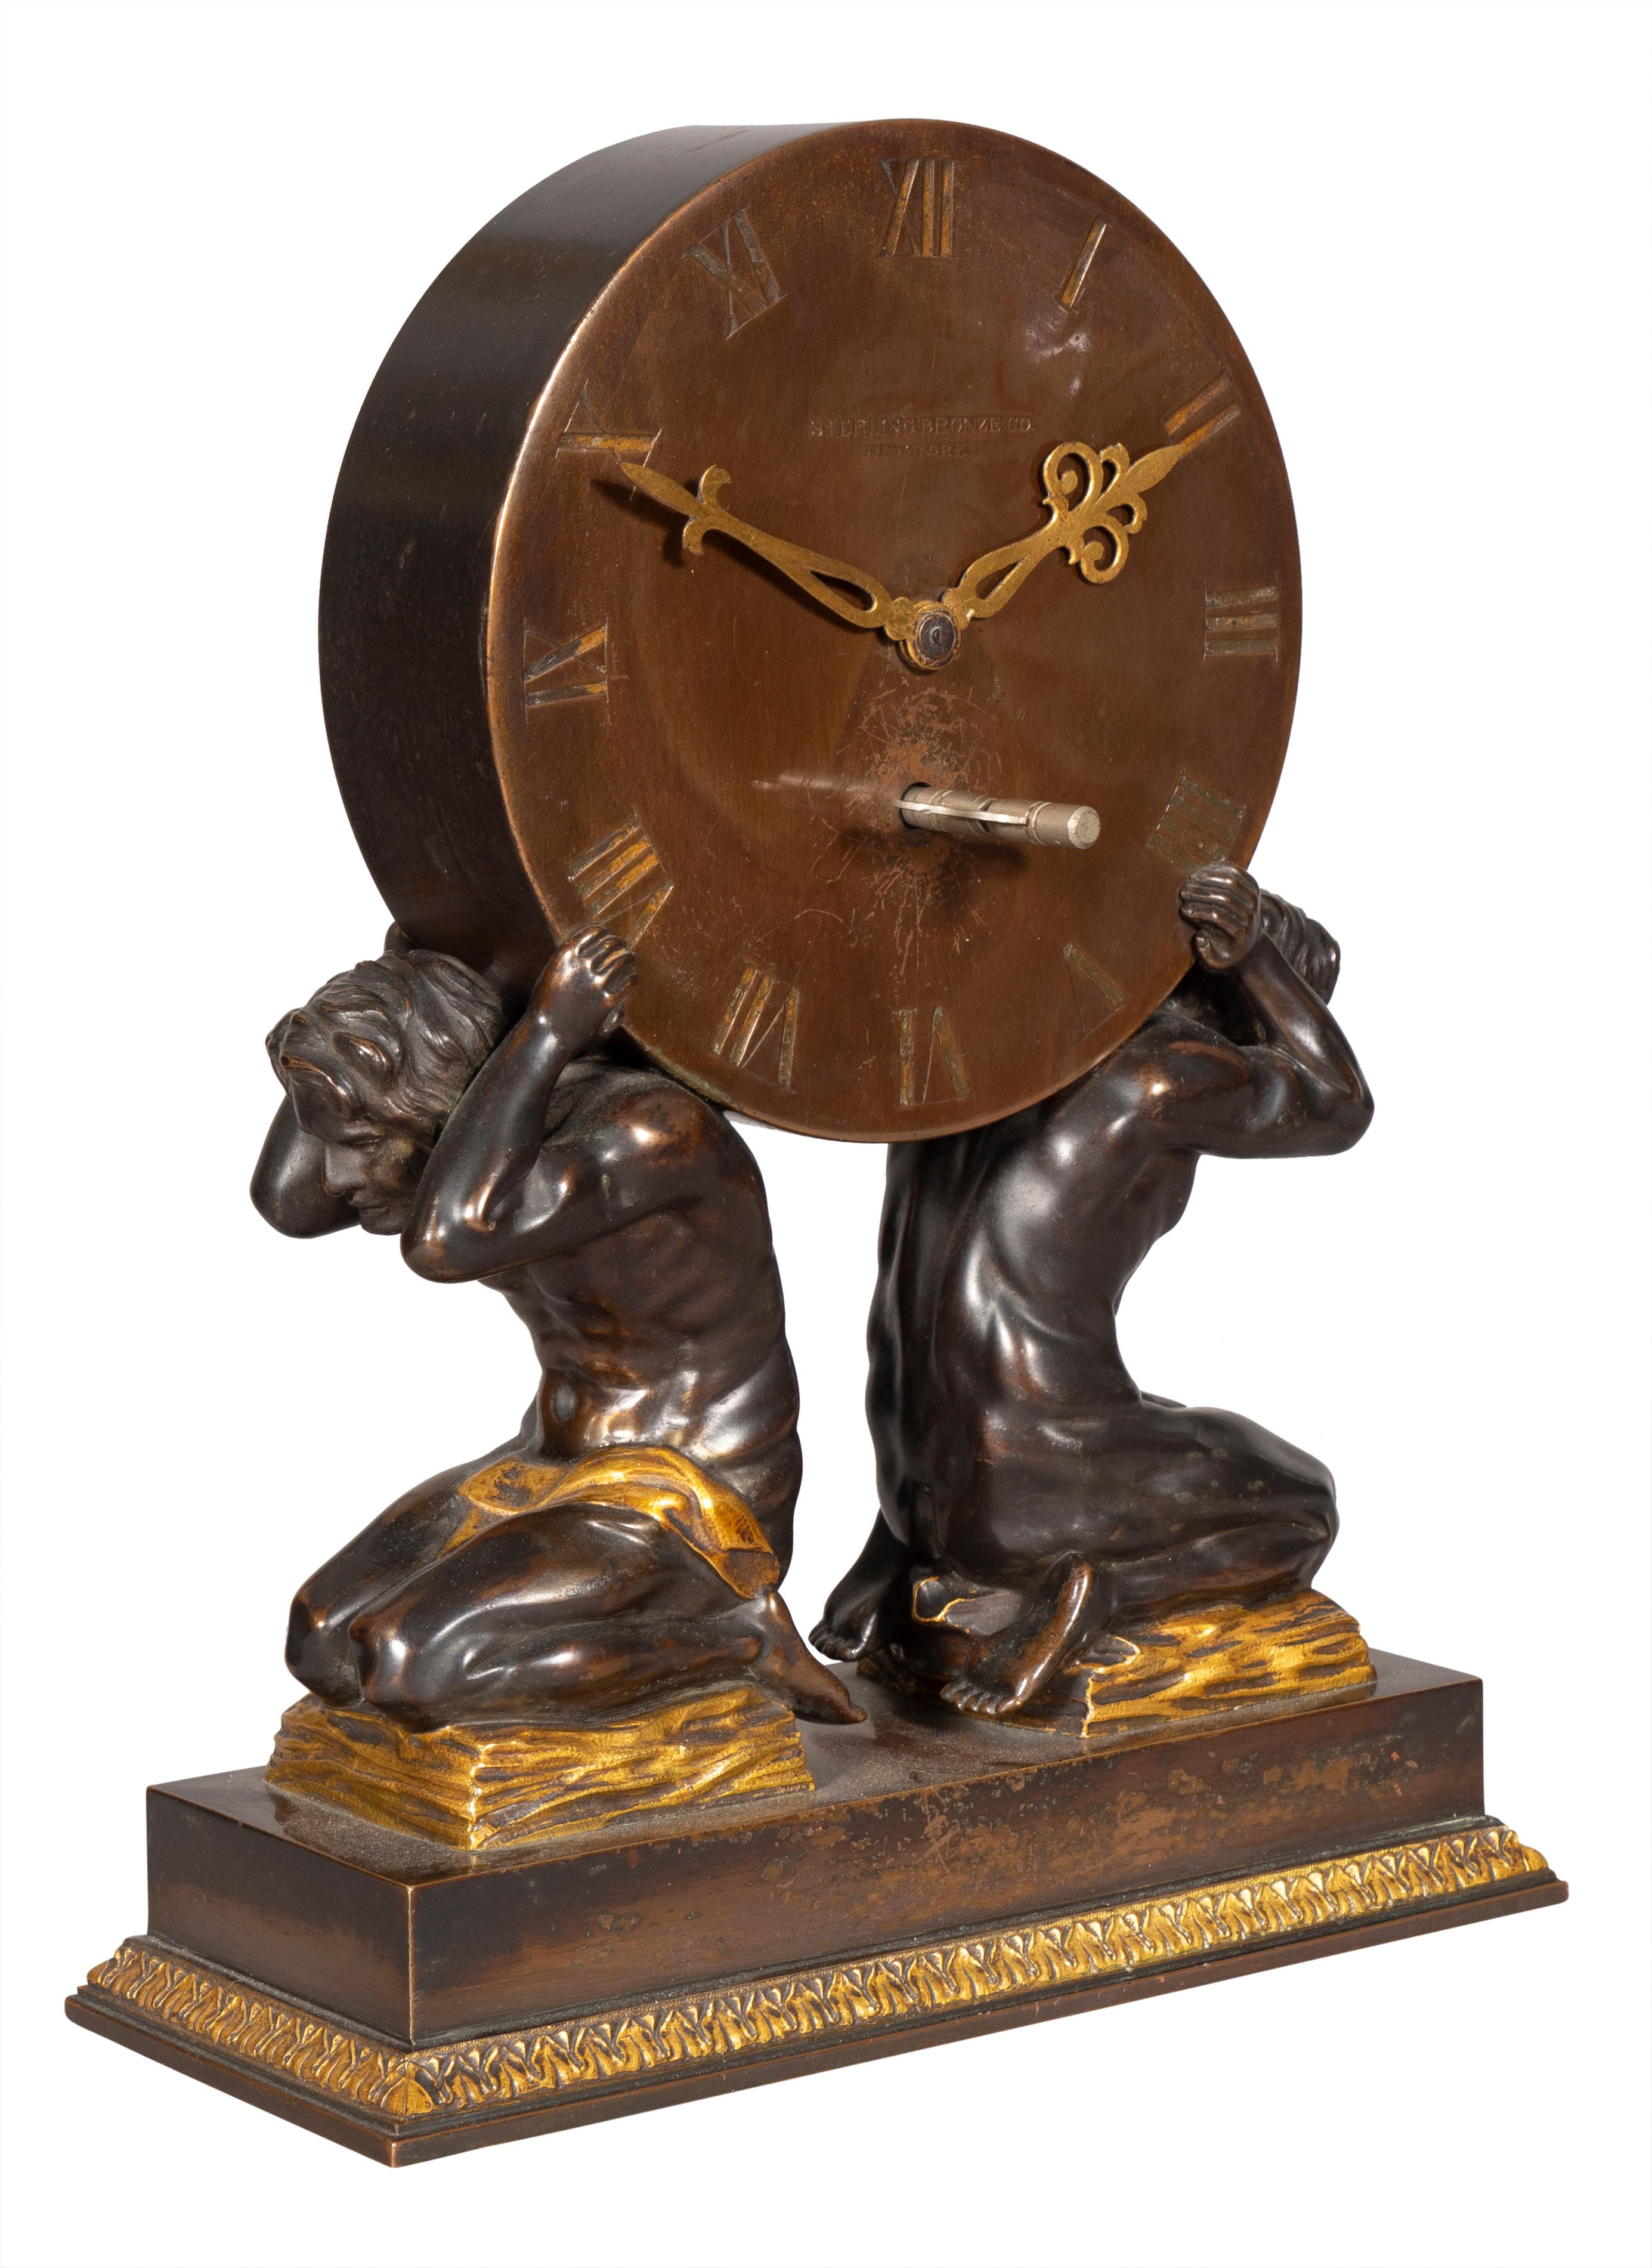 A nice clock of the same period as Caldwell and with Chelsea works of Boston. With key.